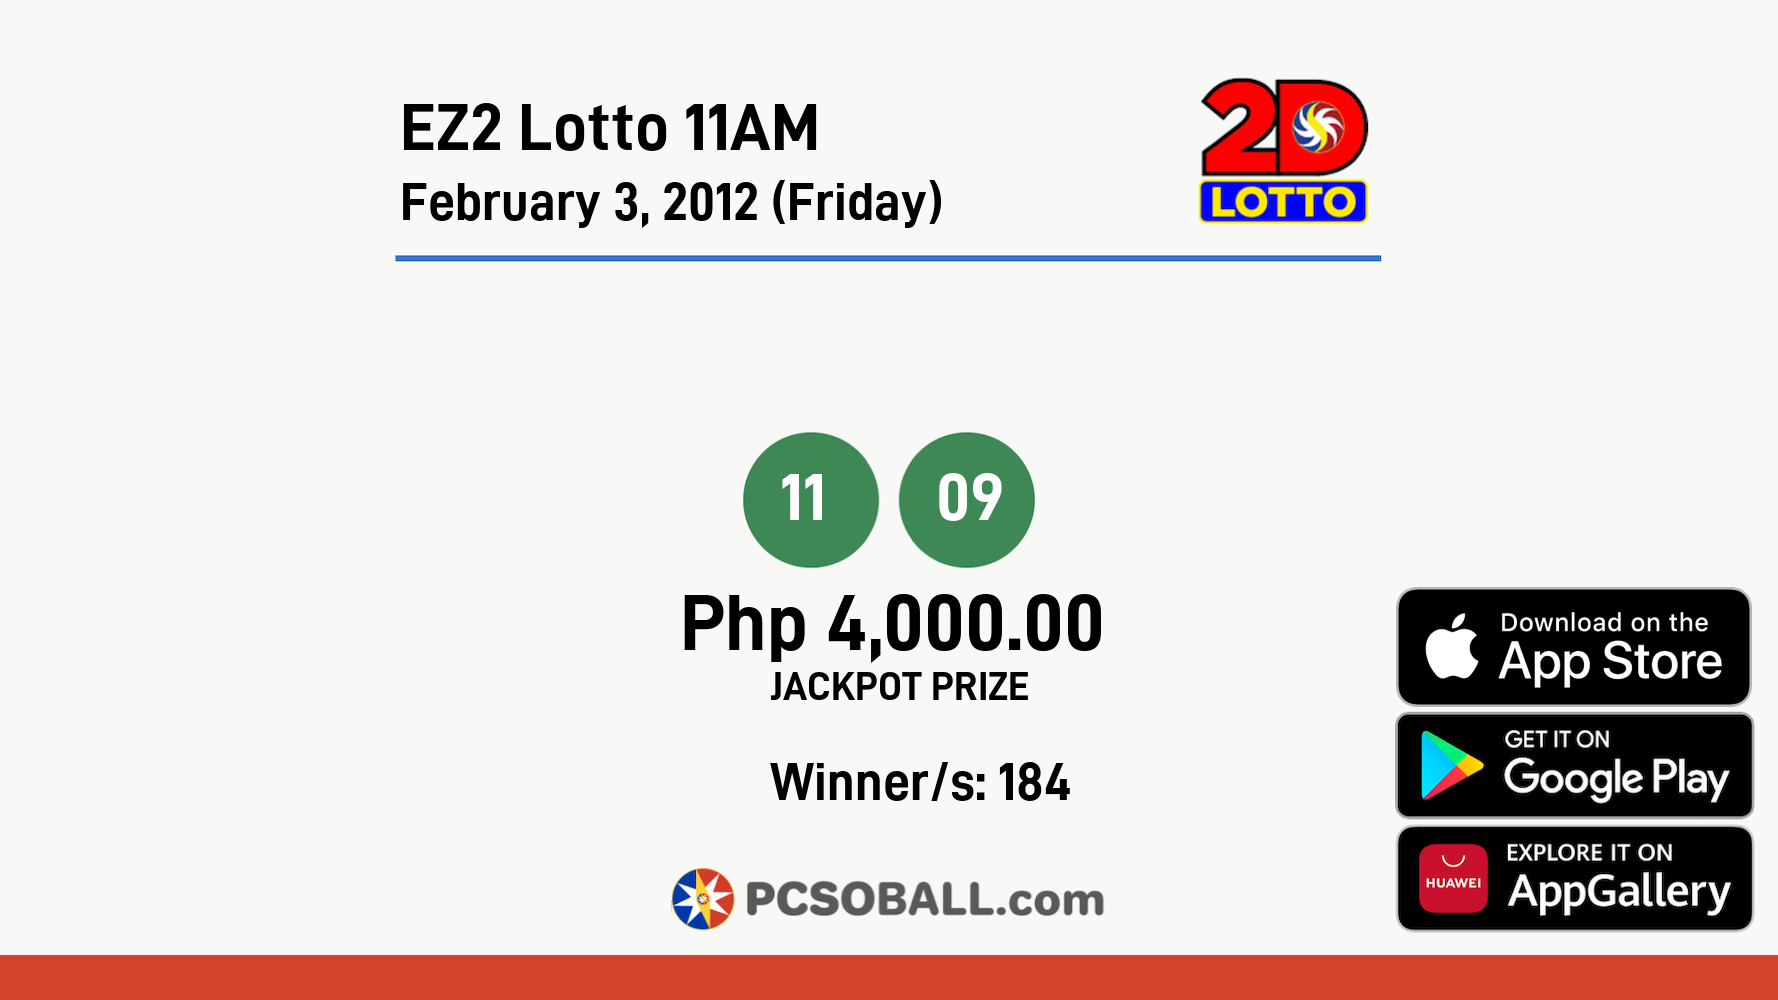 EZ2 Lotto 11AM February 3, 2012 (Friday) Result